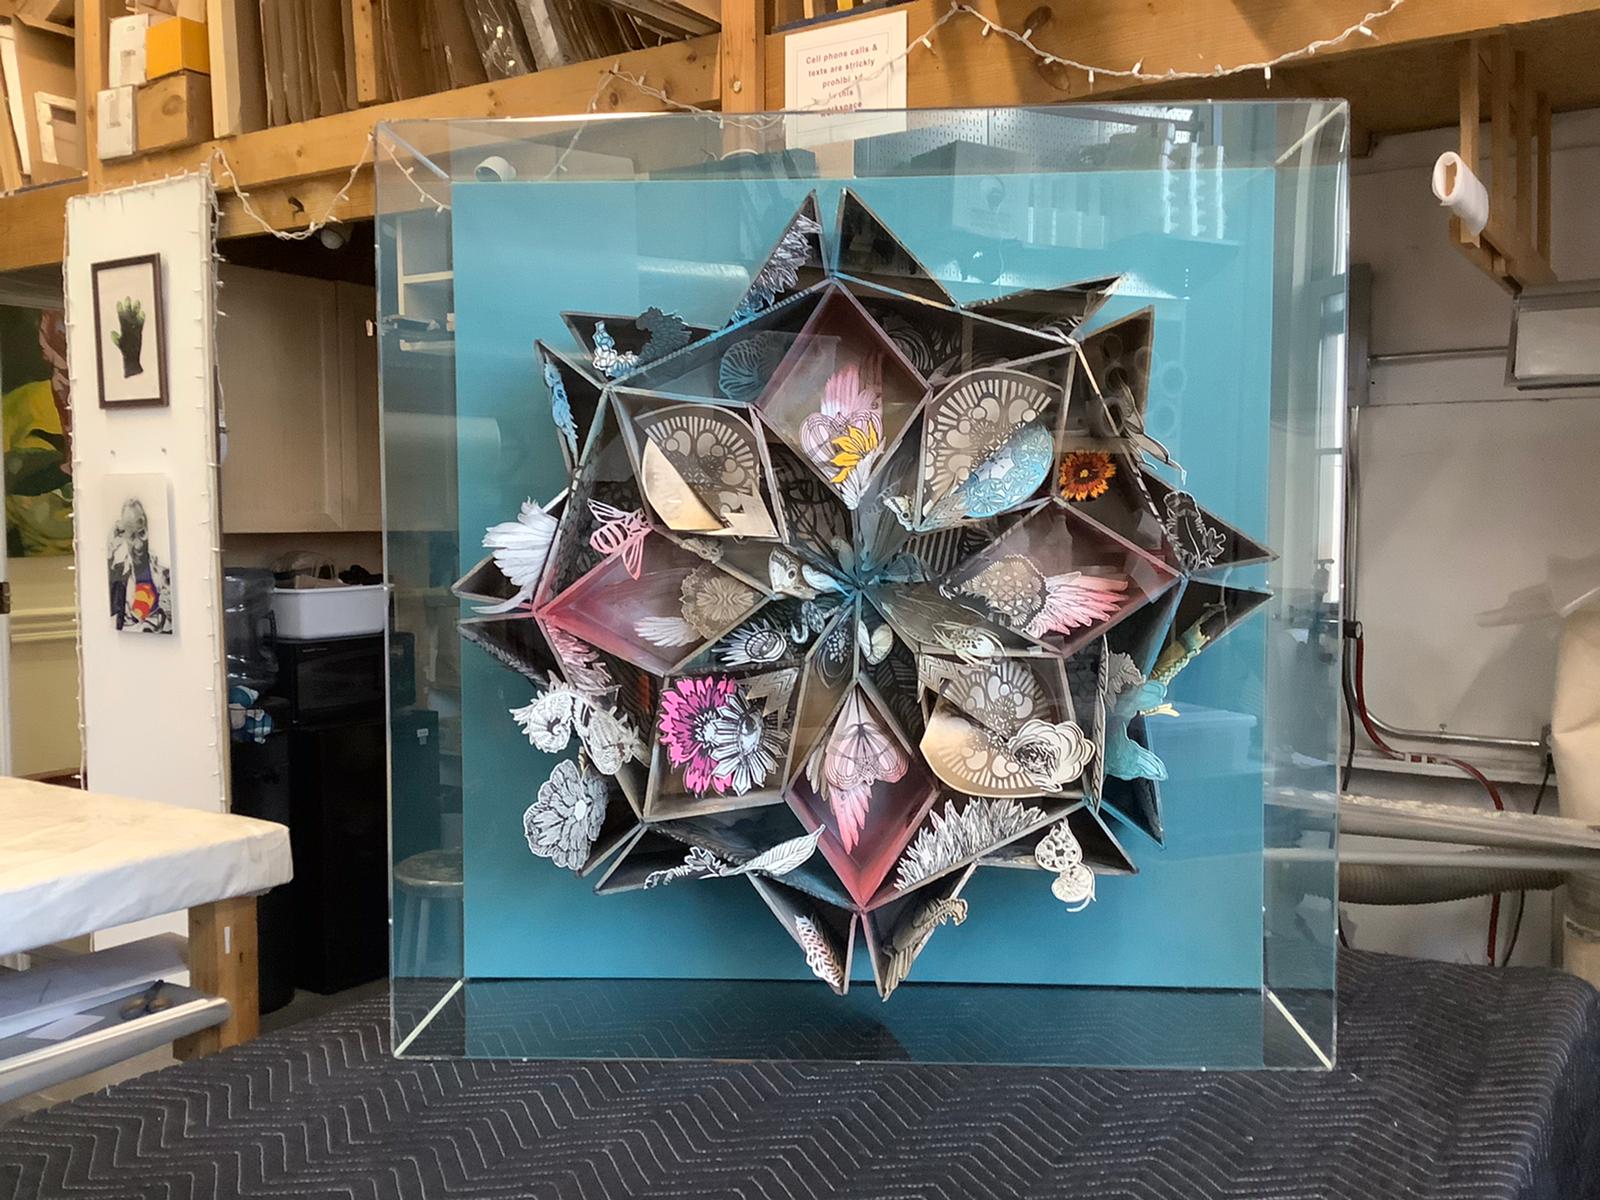 Plexiglass Box for Displaying Swoon Artwork - Frames and Stretchers